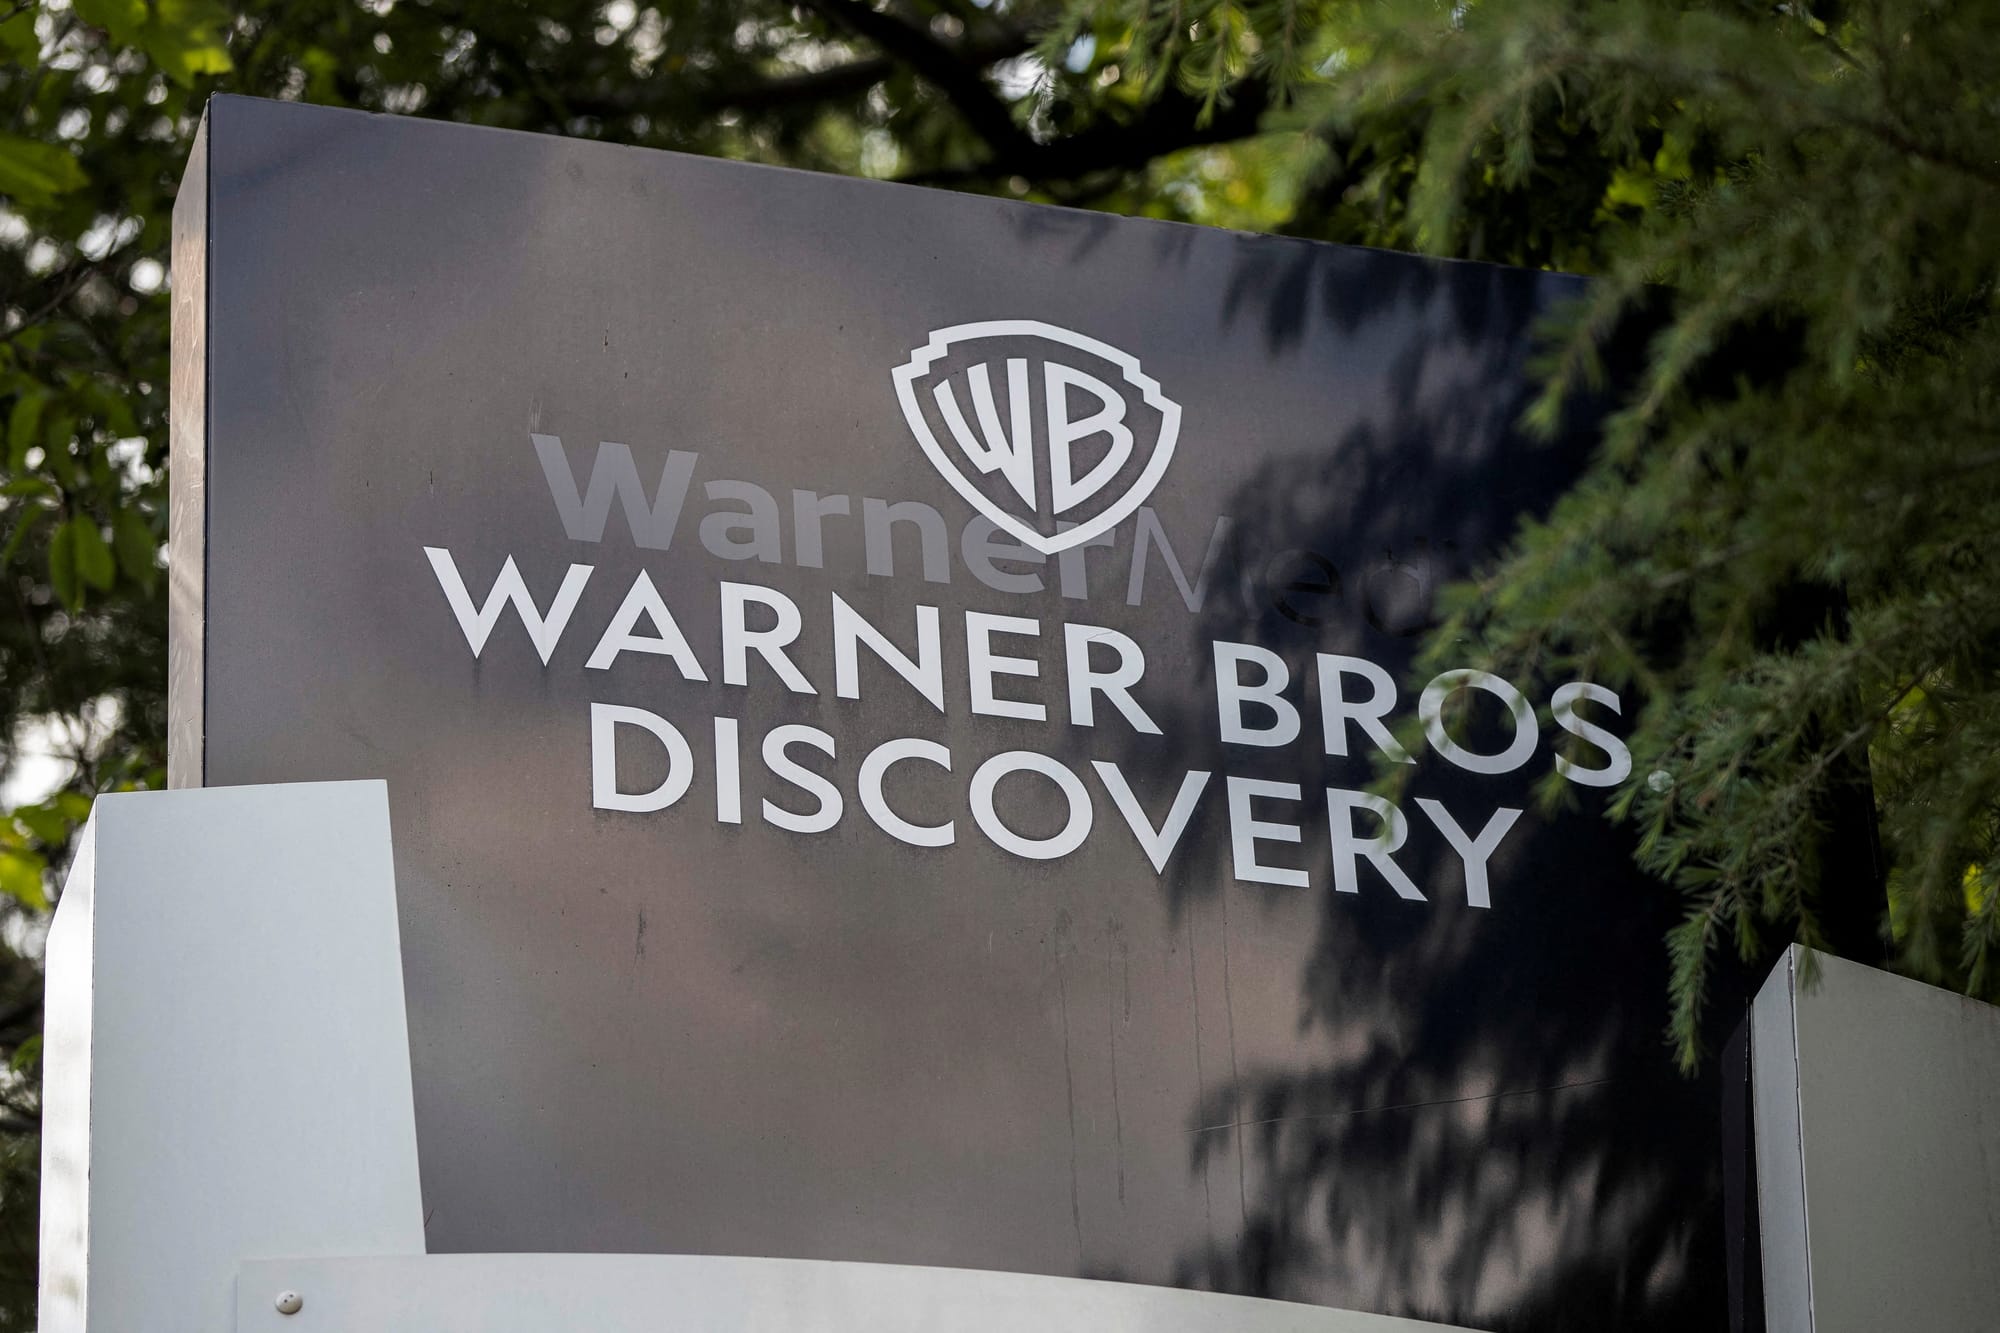 Warner Bros. Discovery and Paramount in merger talks: What's at stake?